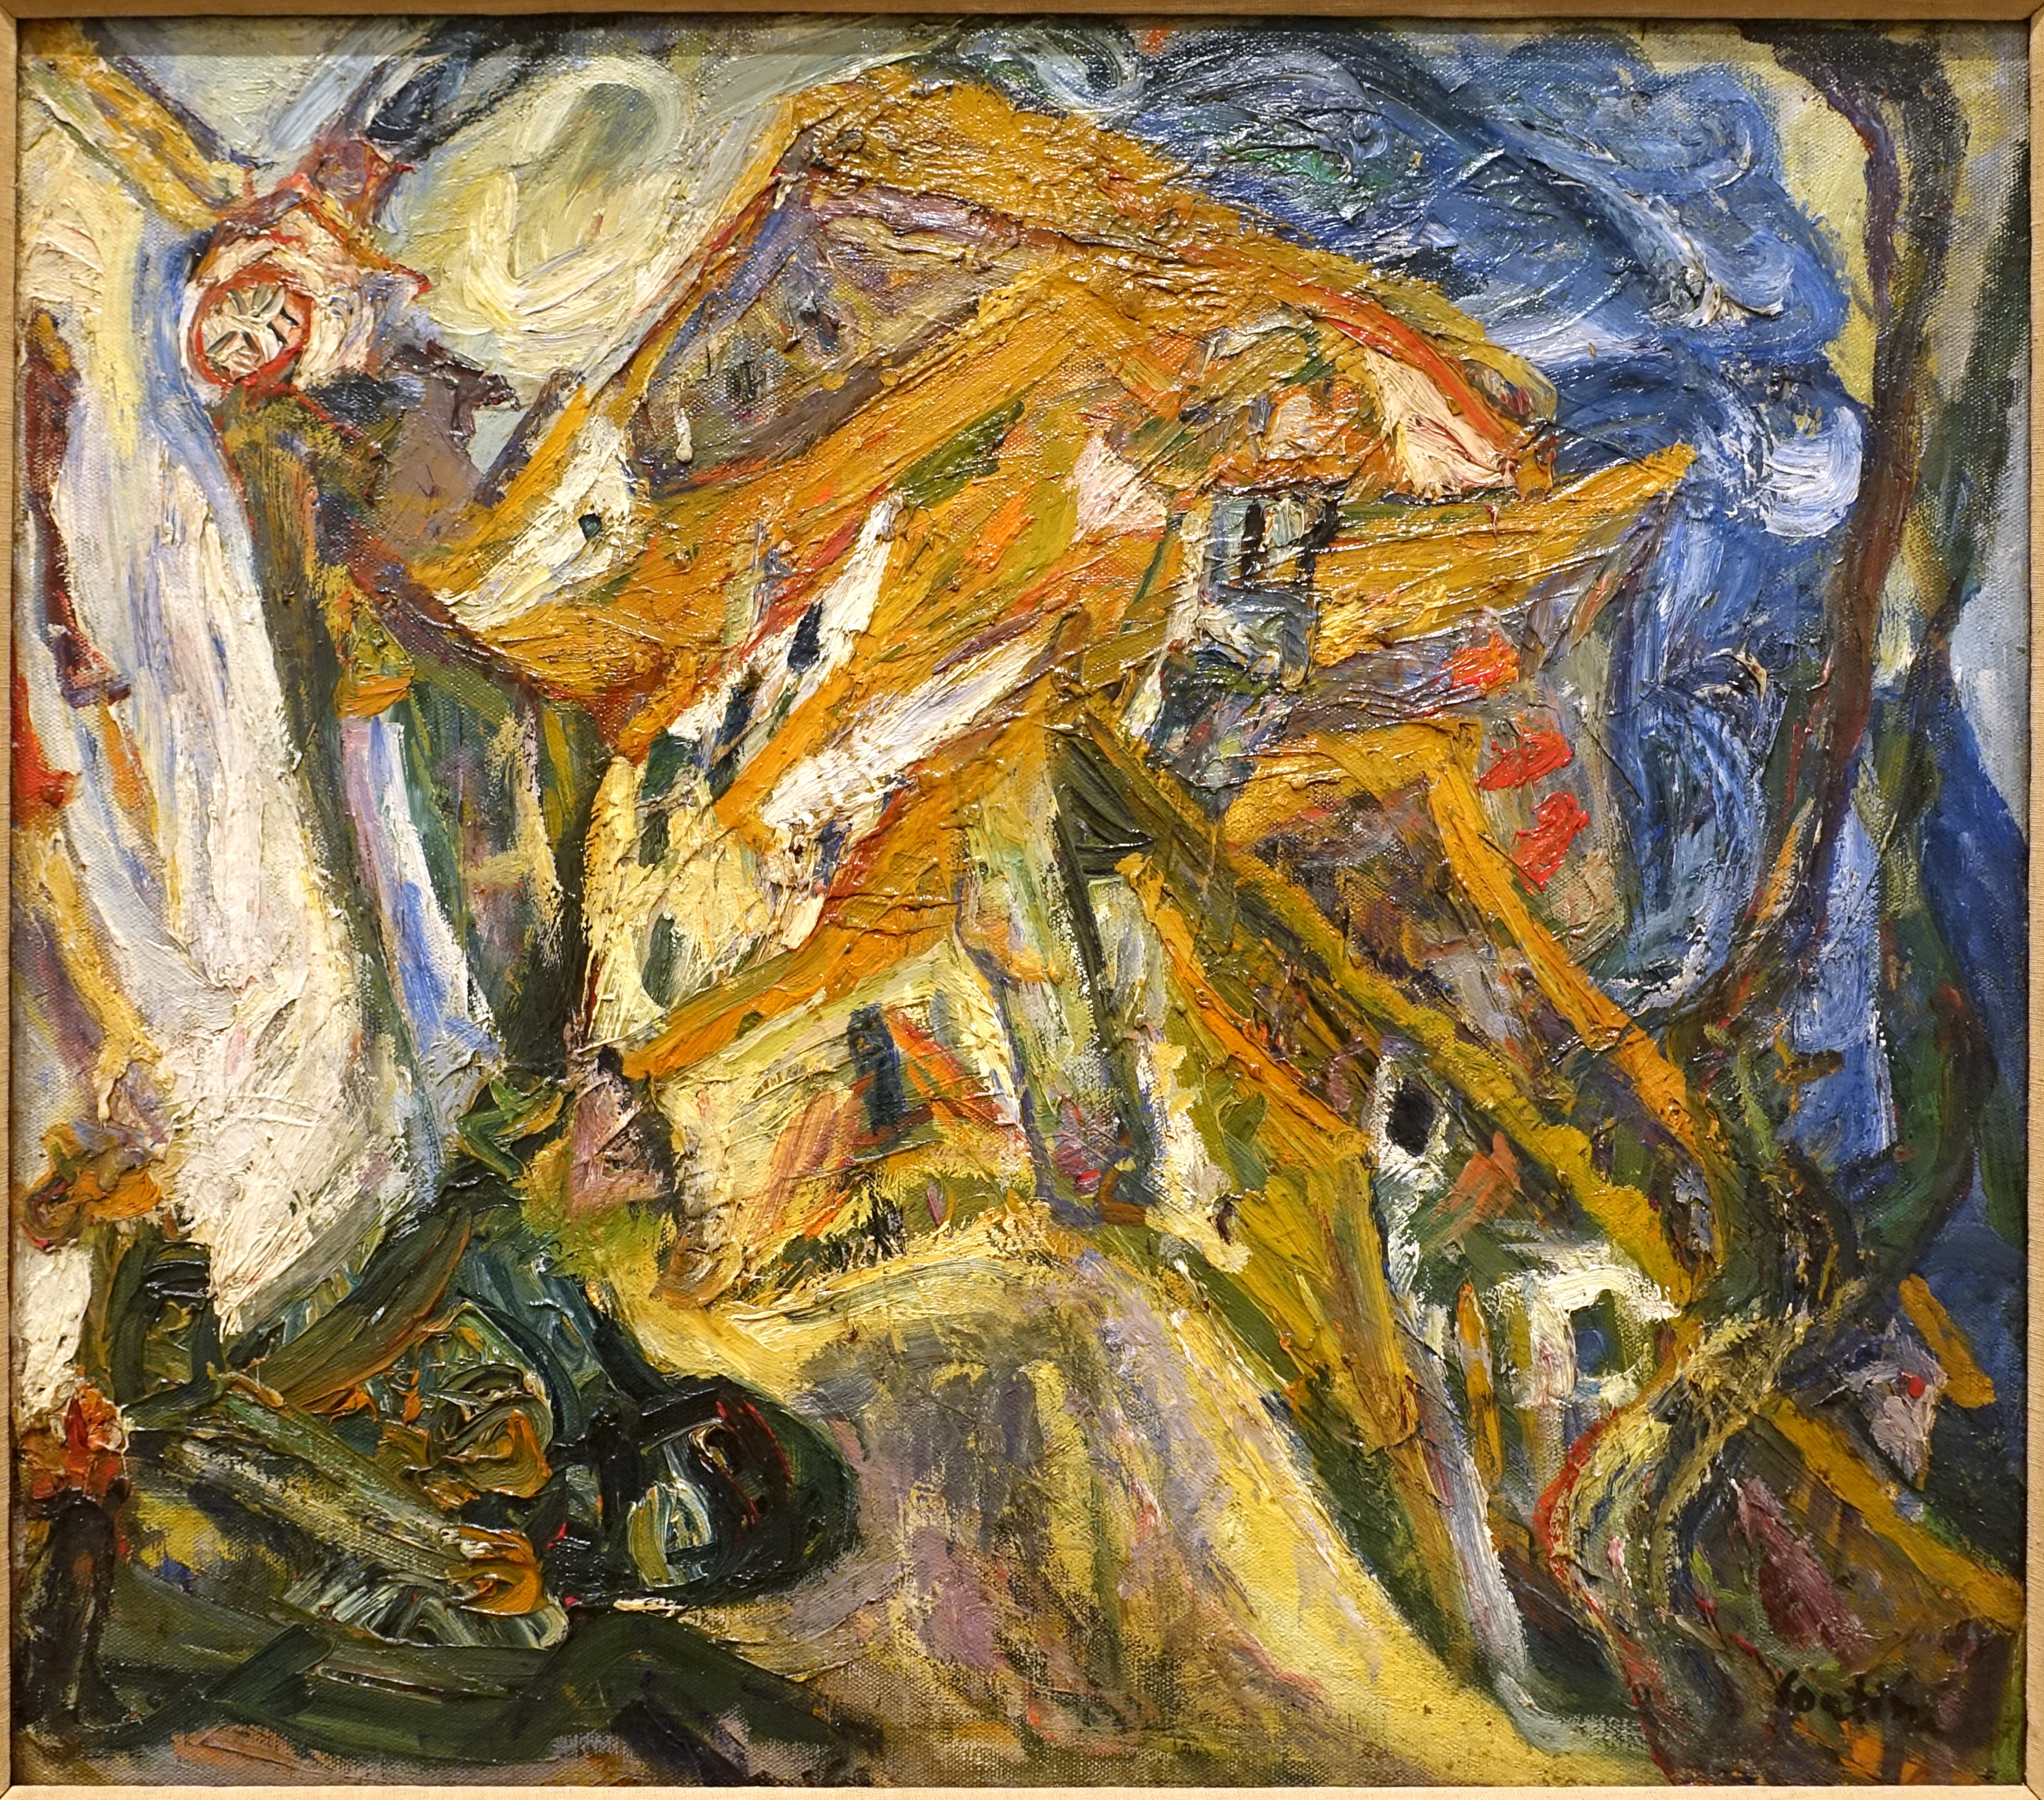 File:View of Ceret, by Chaim Soutine, Russian active in France, c 